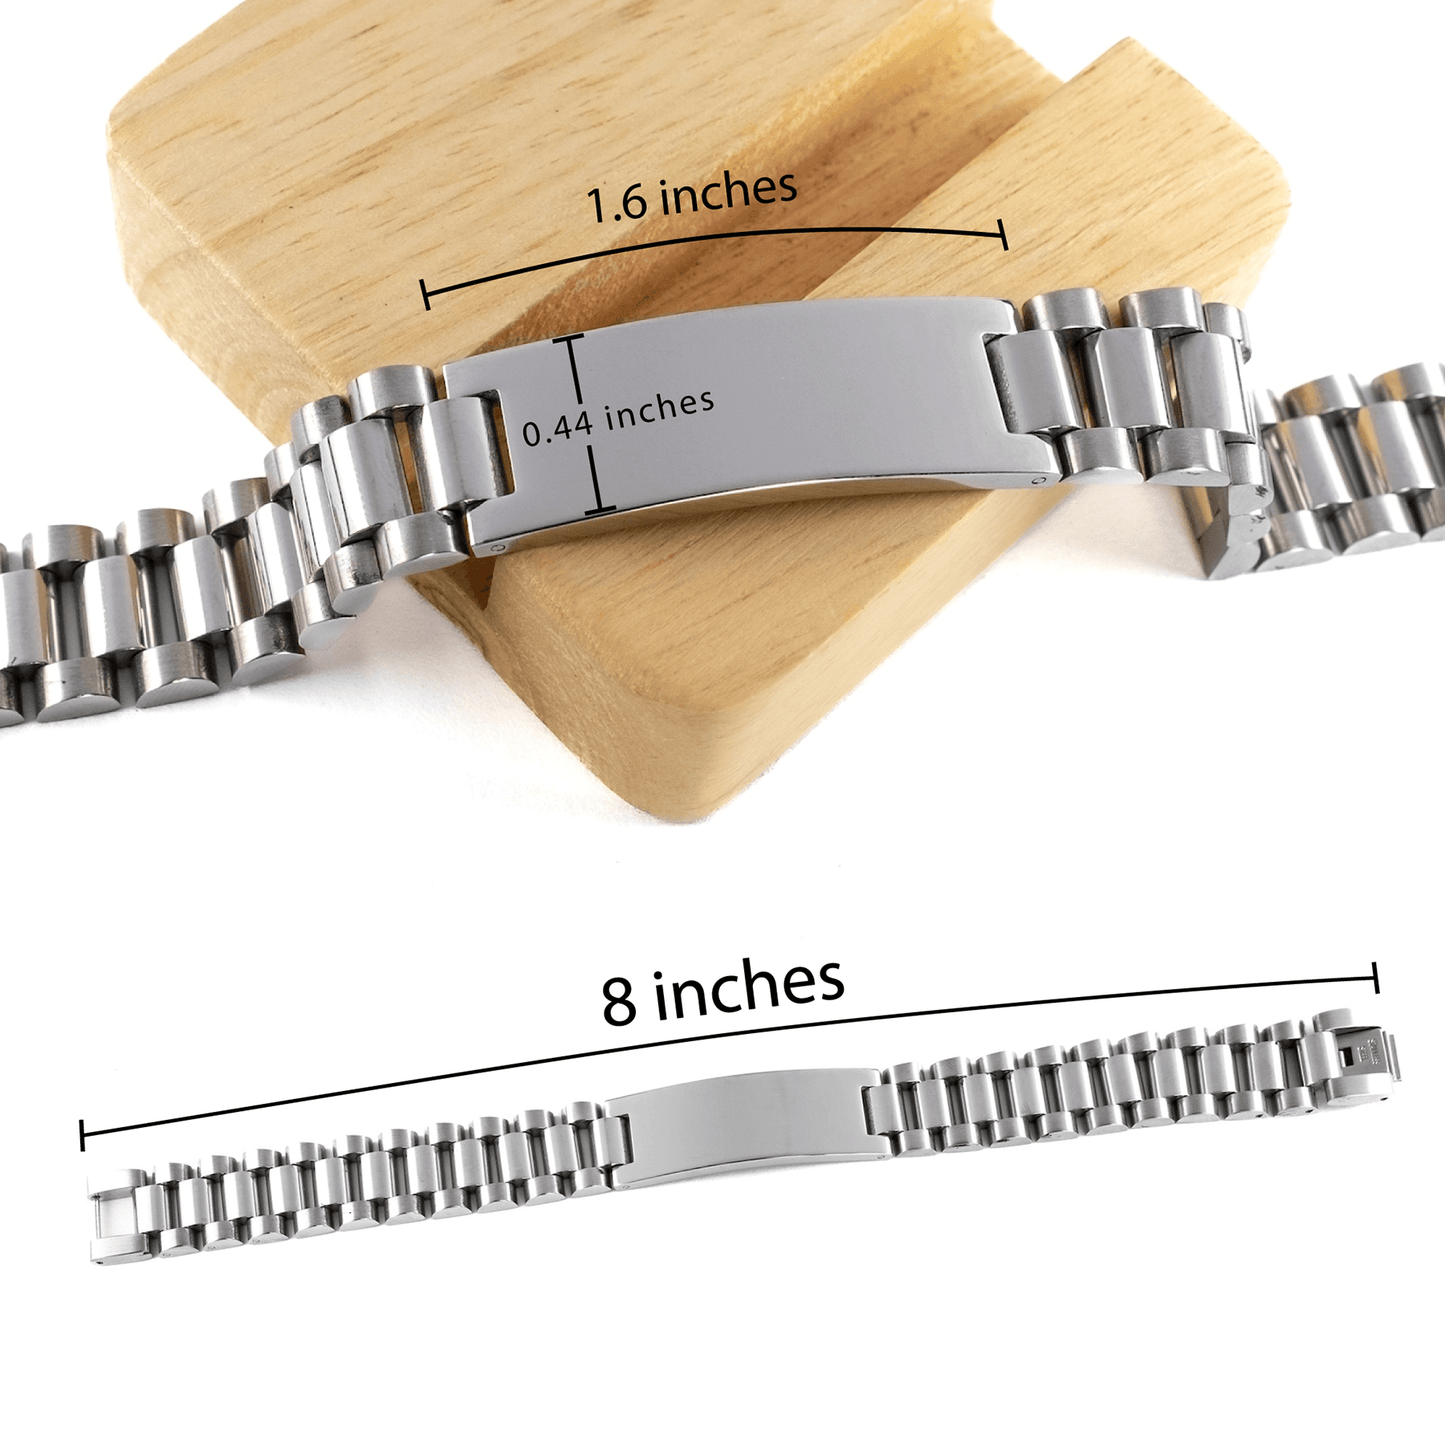 Graphic Designer Ladder Stainless Steel Engraved Bracelet - Thanks for being who you are - Birthday Christmas Jewelry Gifts Coworkers Colleague Boss - Mallard Moon Gift Shop